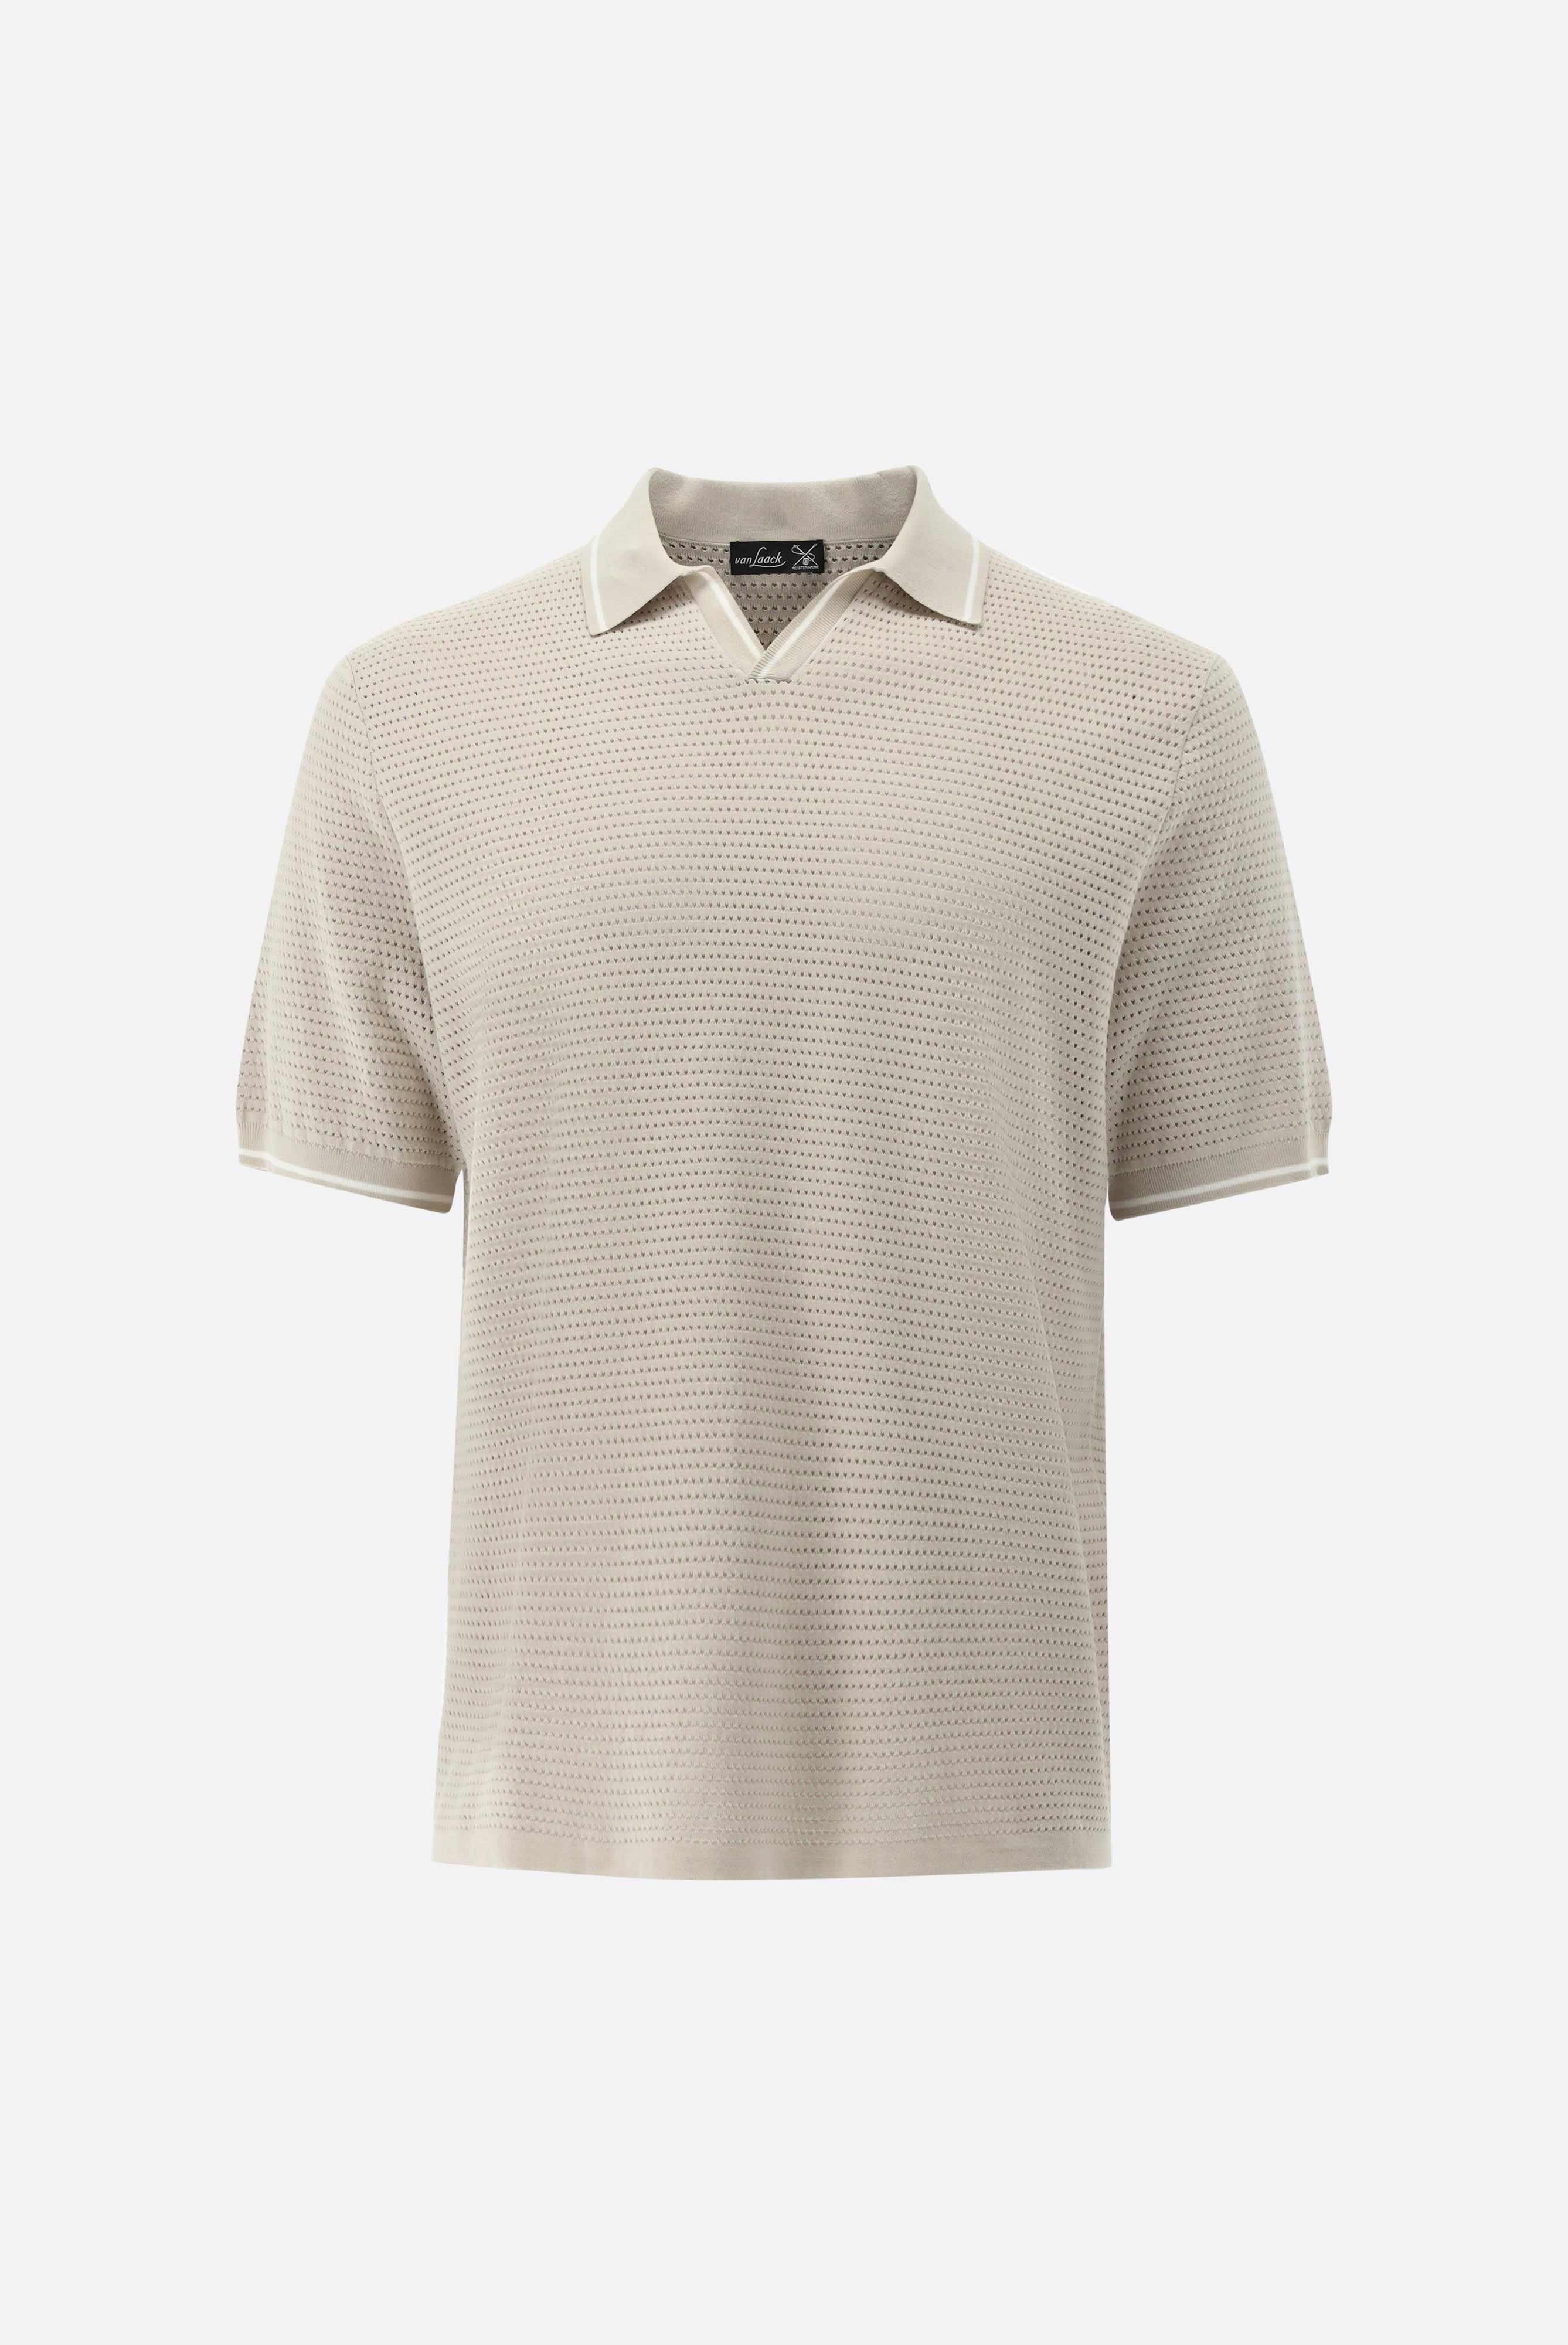 Poloshirts+V-neck polo in mesh structure with contrast collar+82.8996.S7.S00267.110.S